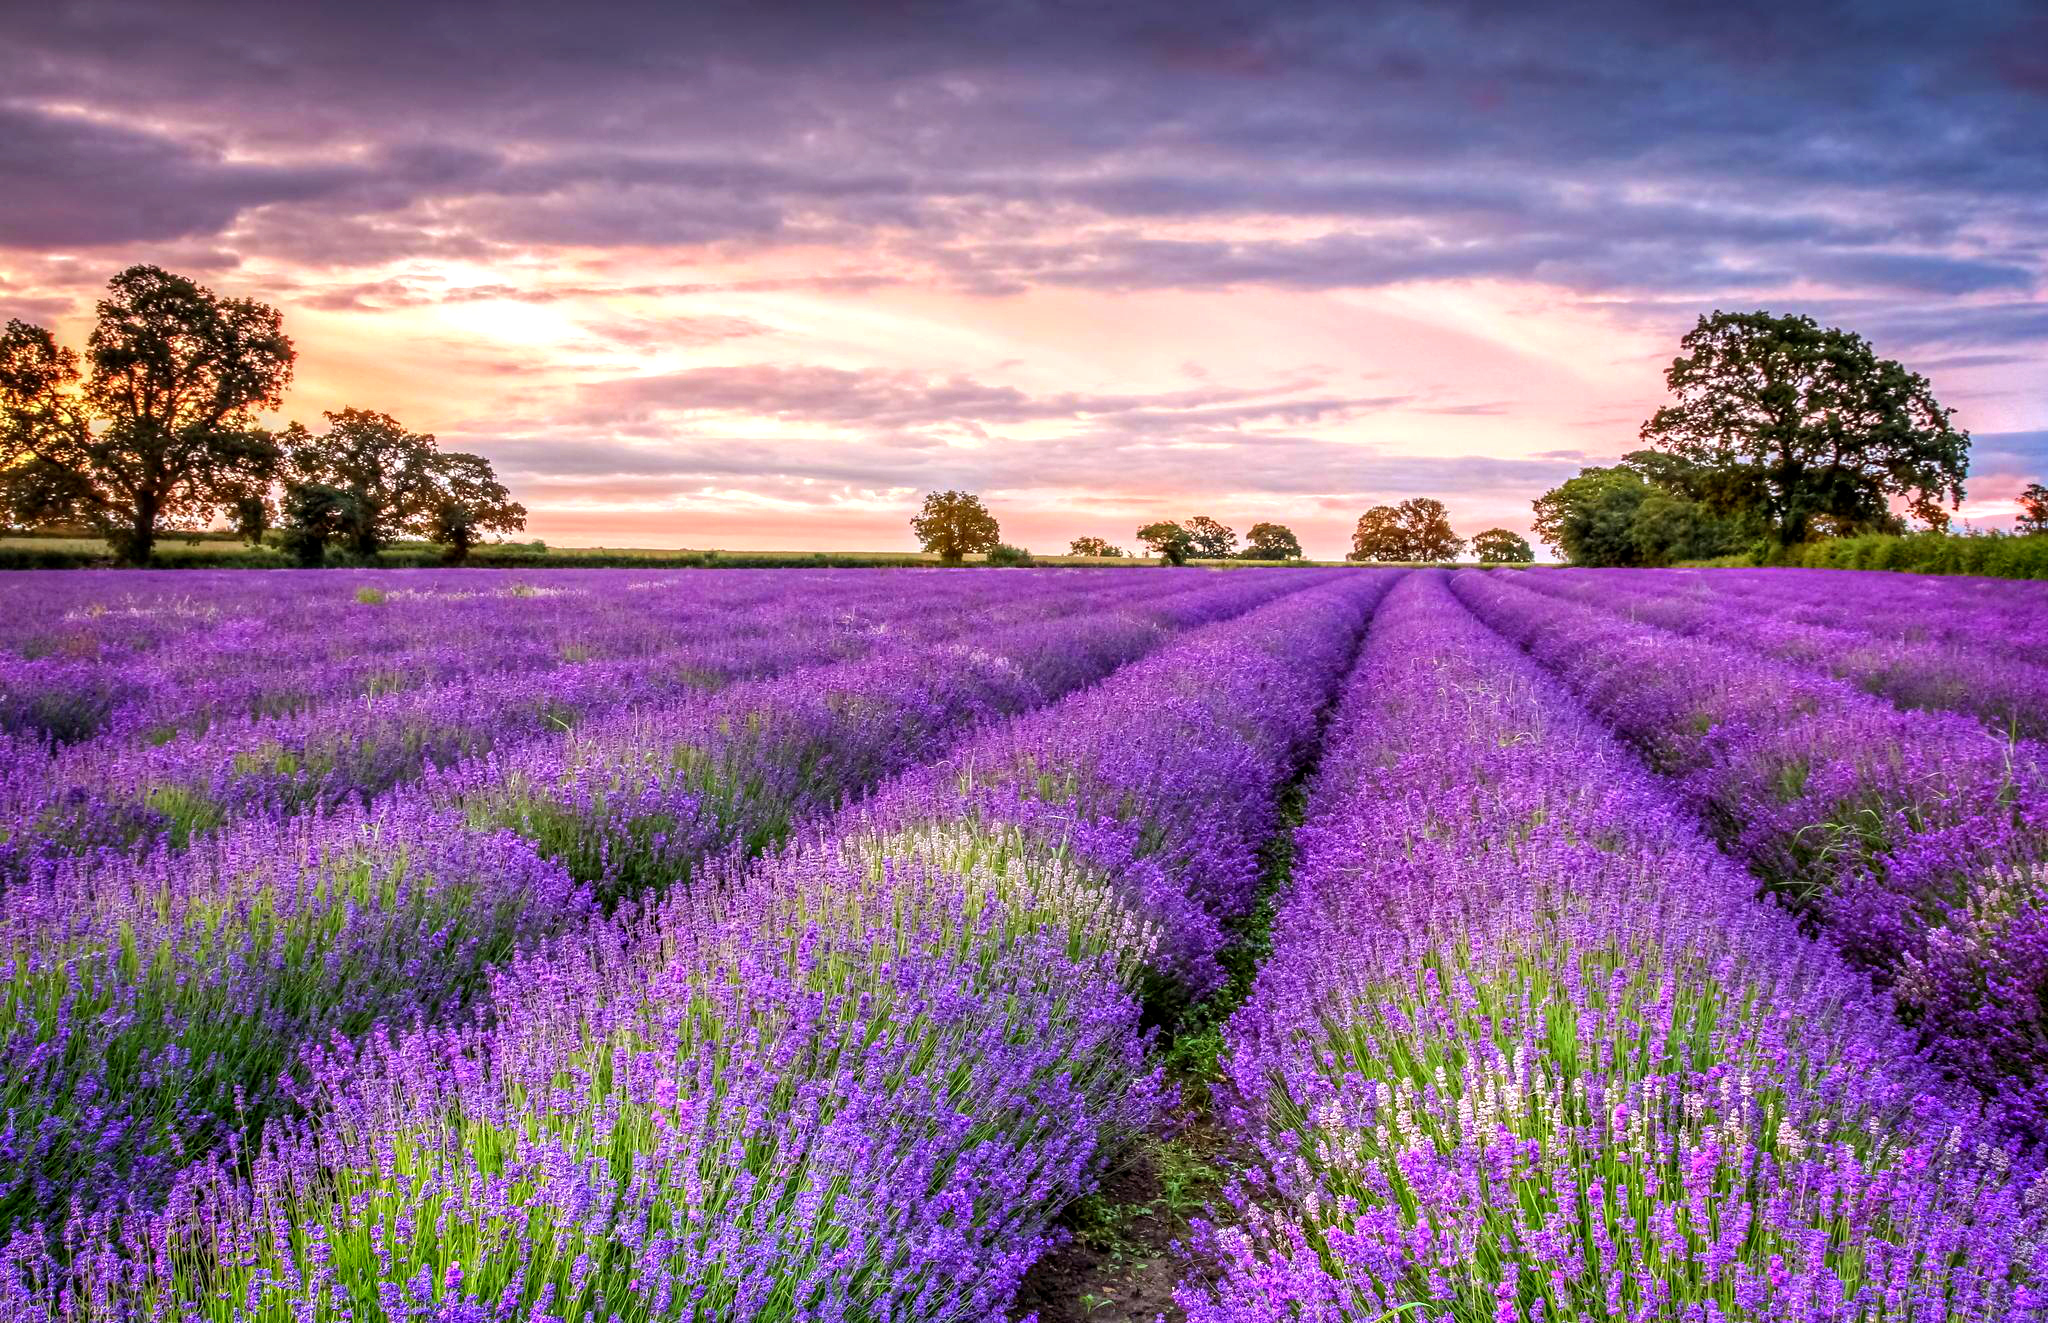 Lavender Wallpapers High Quality Download Free HD Wallpapers Download Free Images Wallpaper [wallpaper981.blogspot.com]